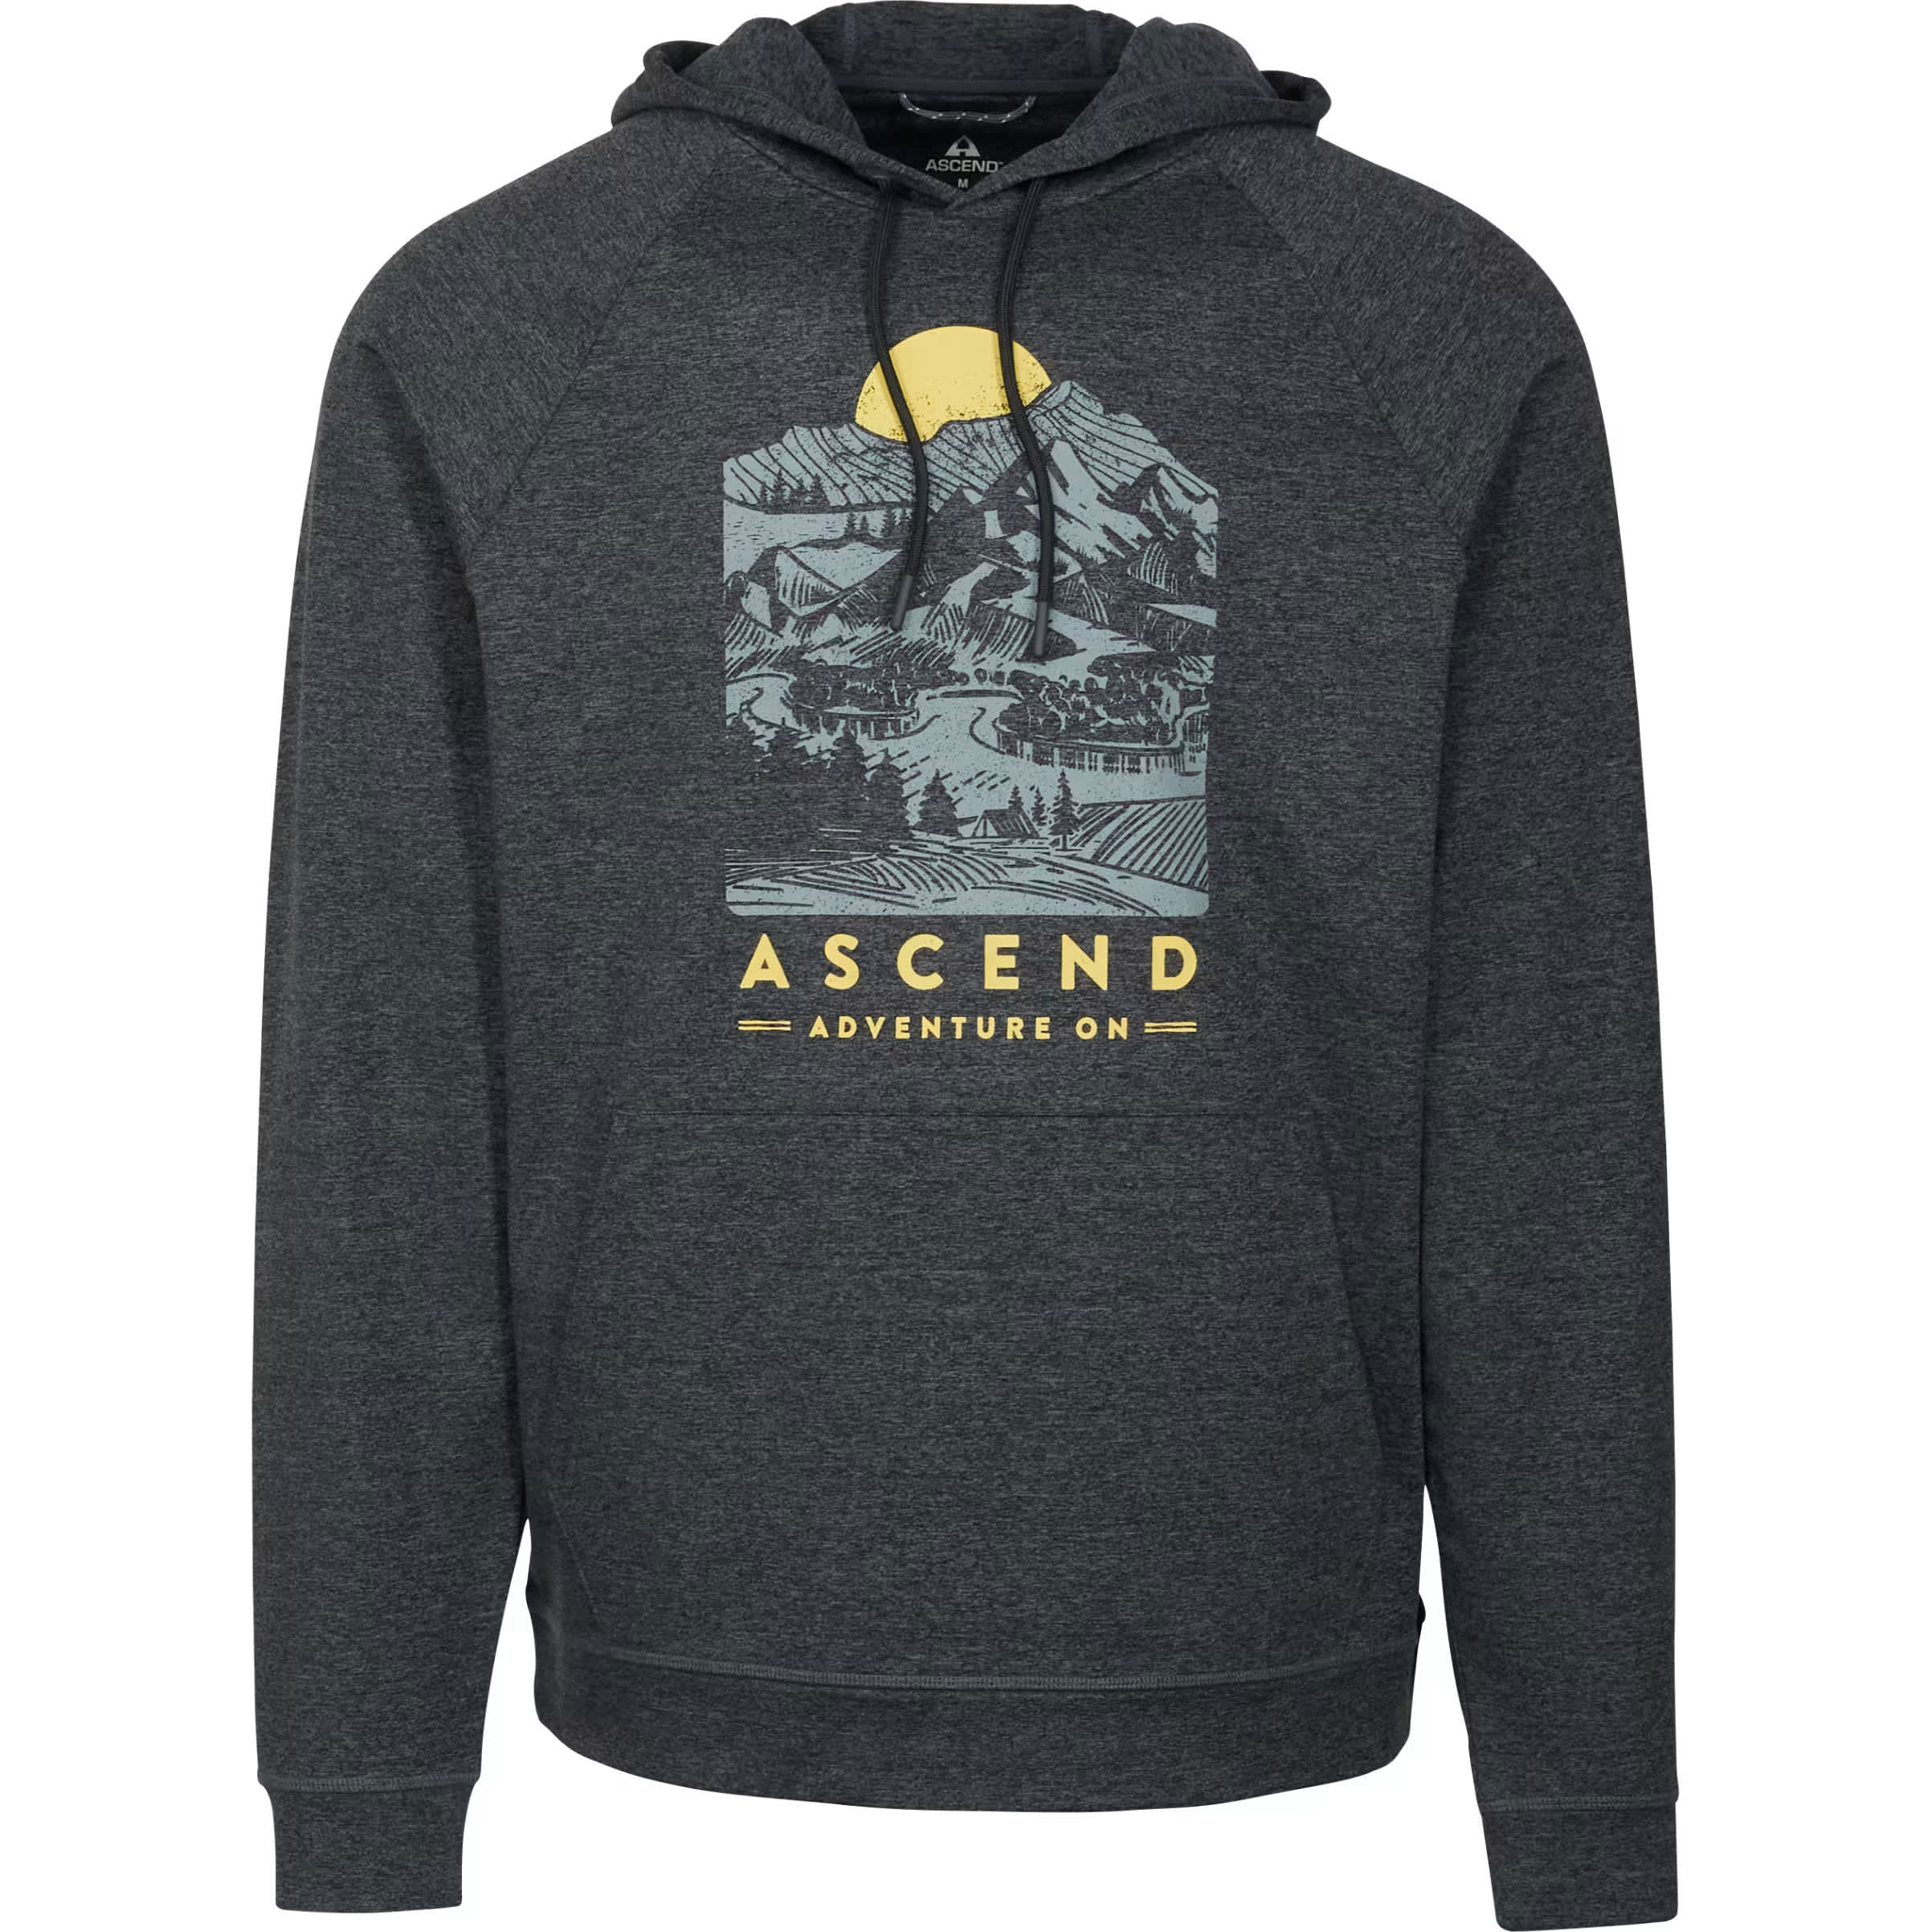 Ascend® Men’s Long-Sleeve Graphic Hoodie